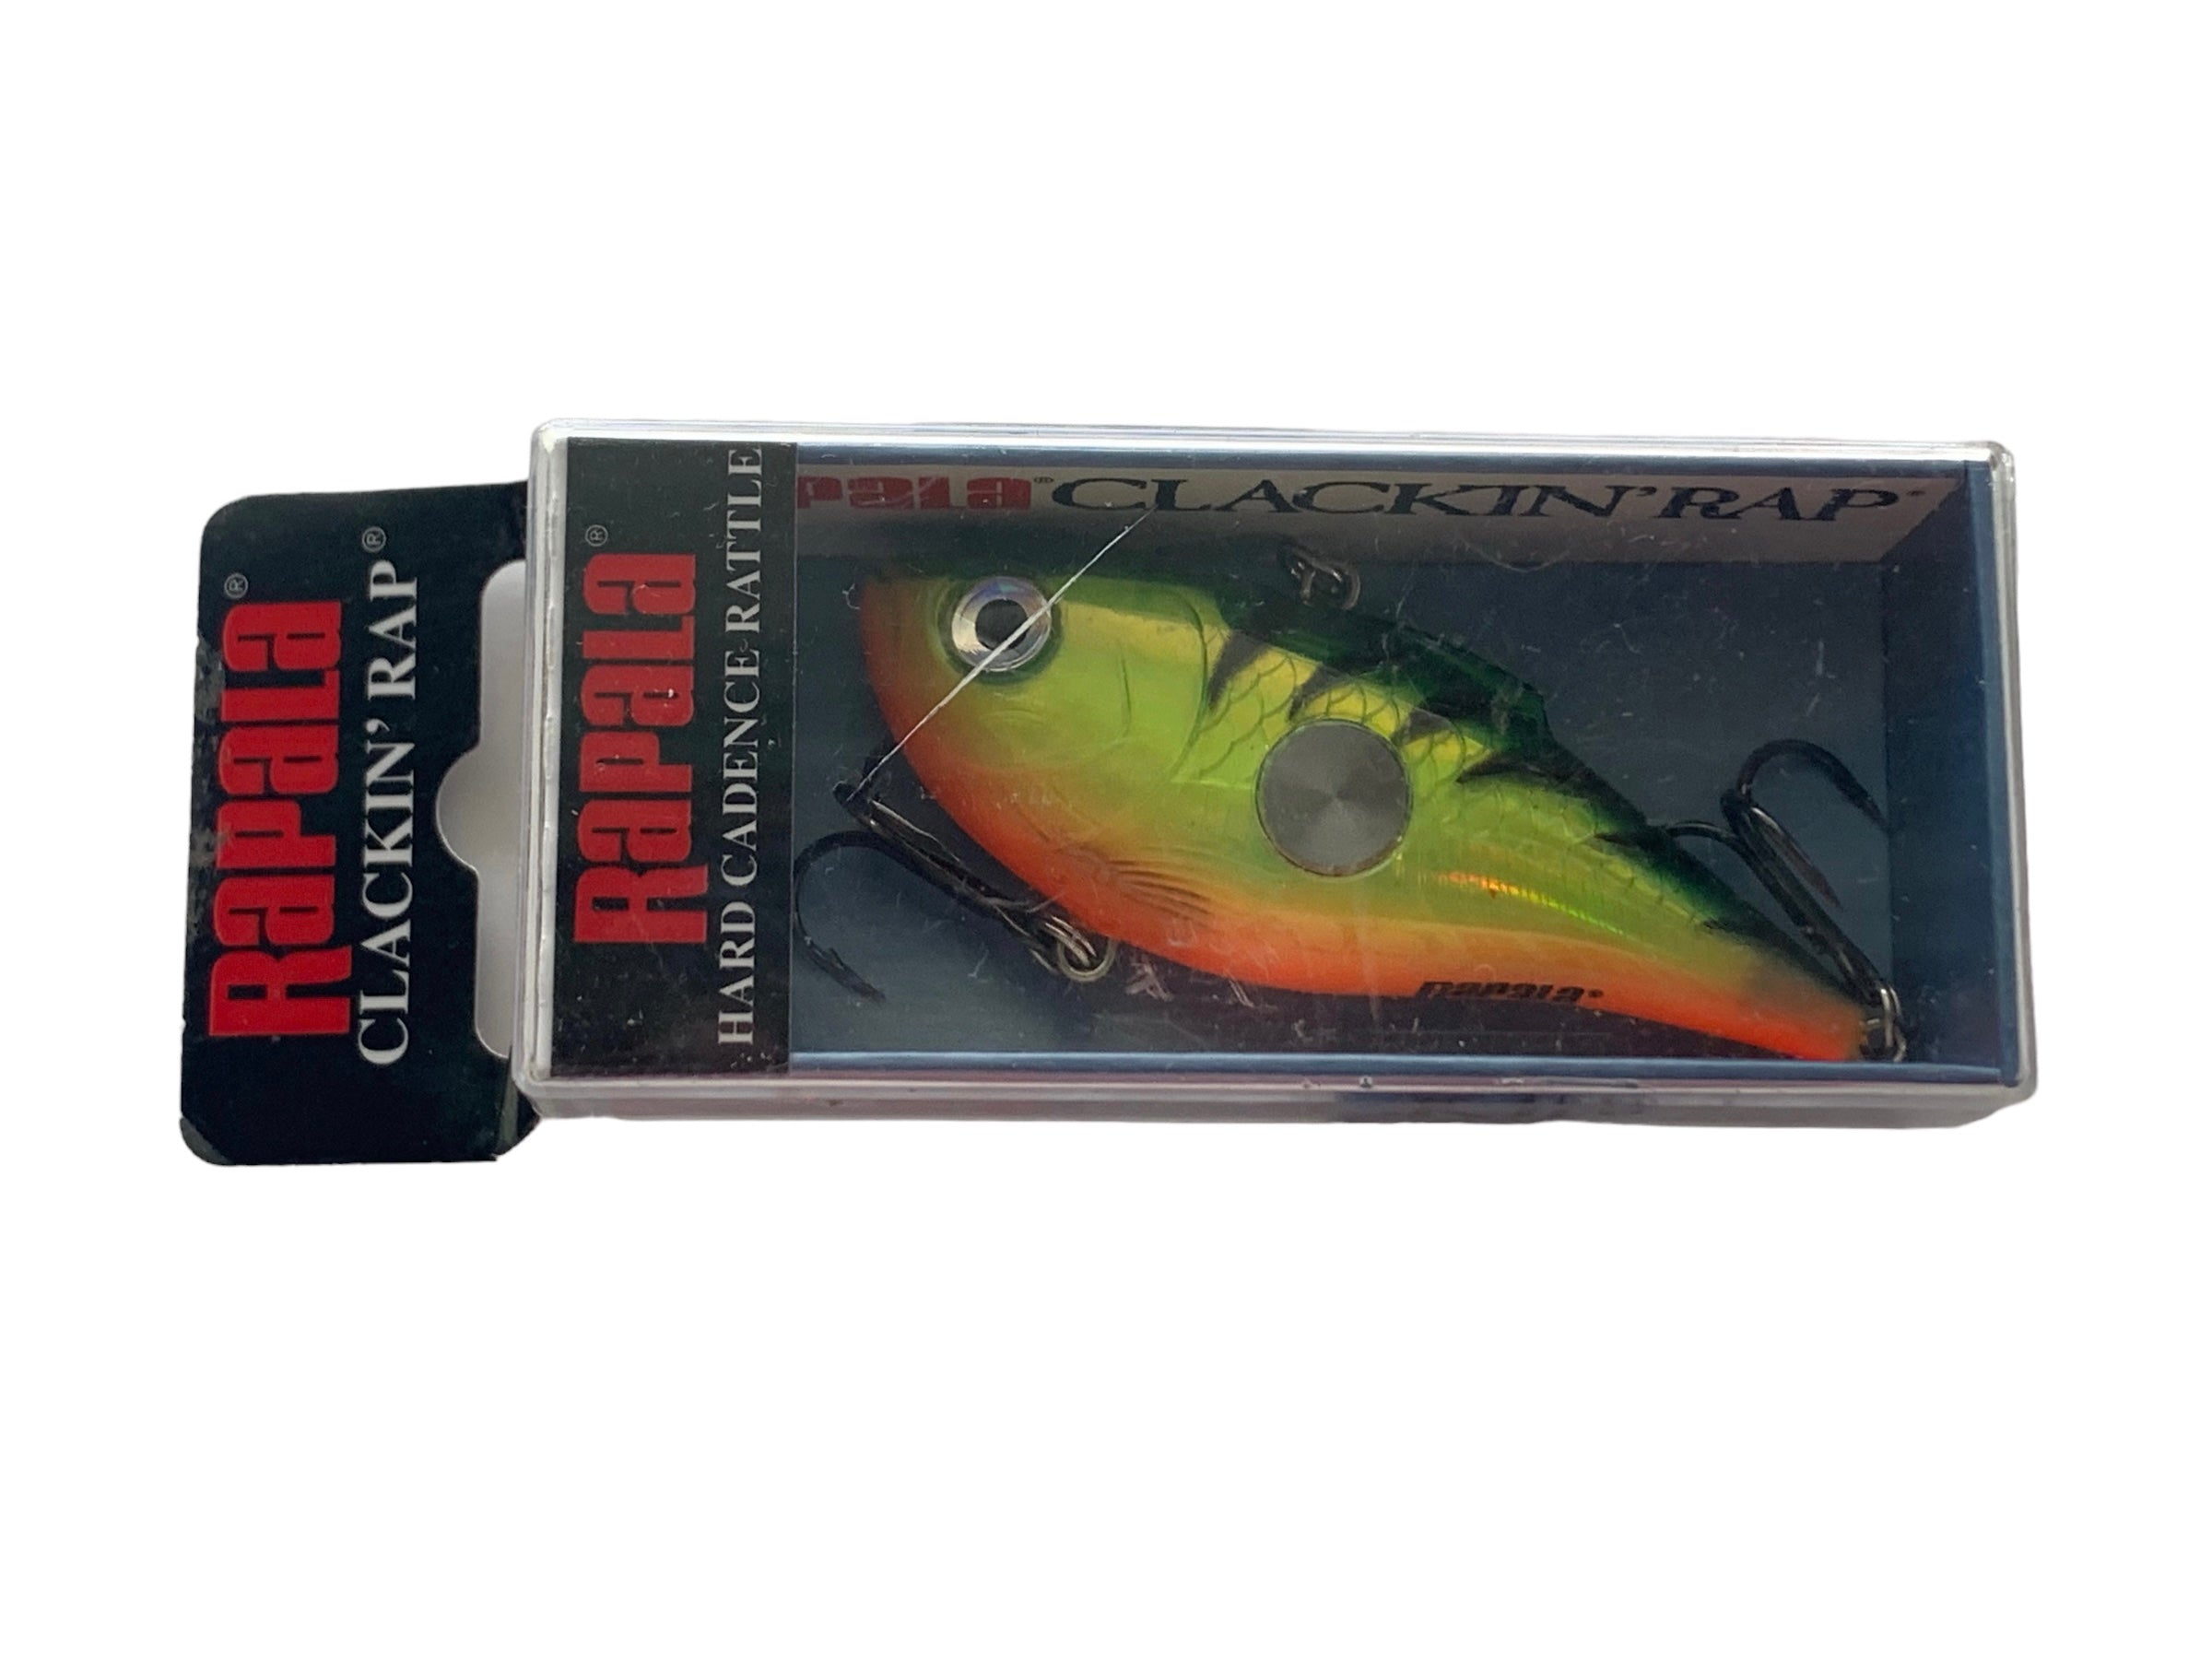 RAPALA CNR-6 CLACKIN' RAP Fishing Lure • FIRE TIGER – Toad Tackle